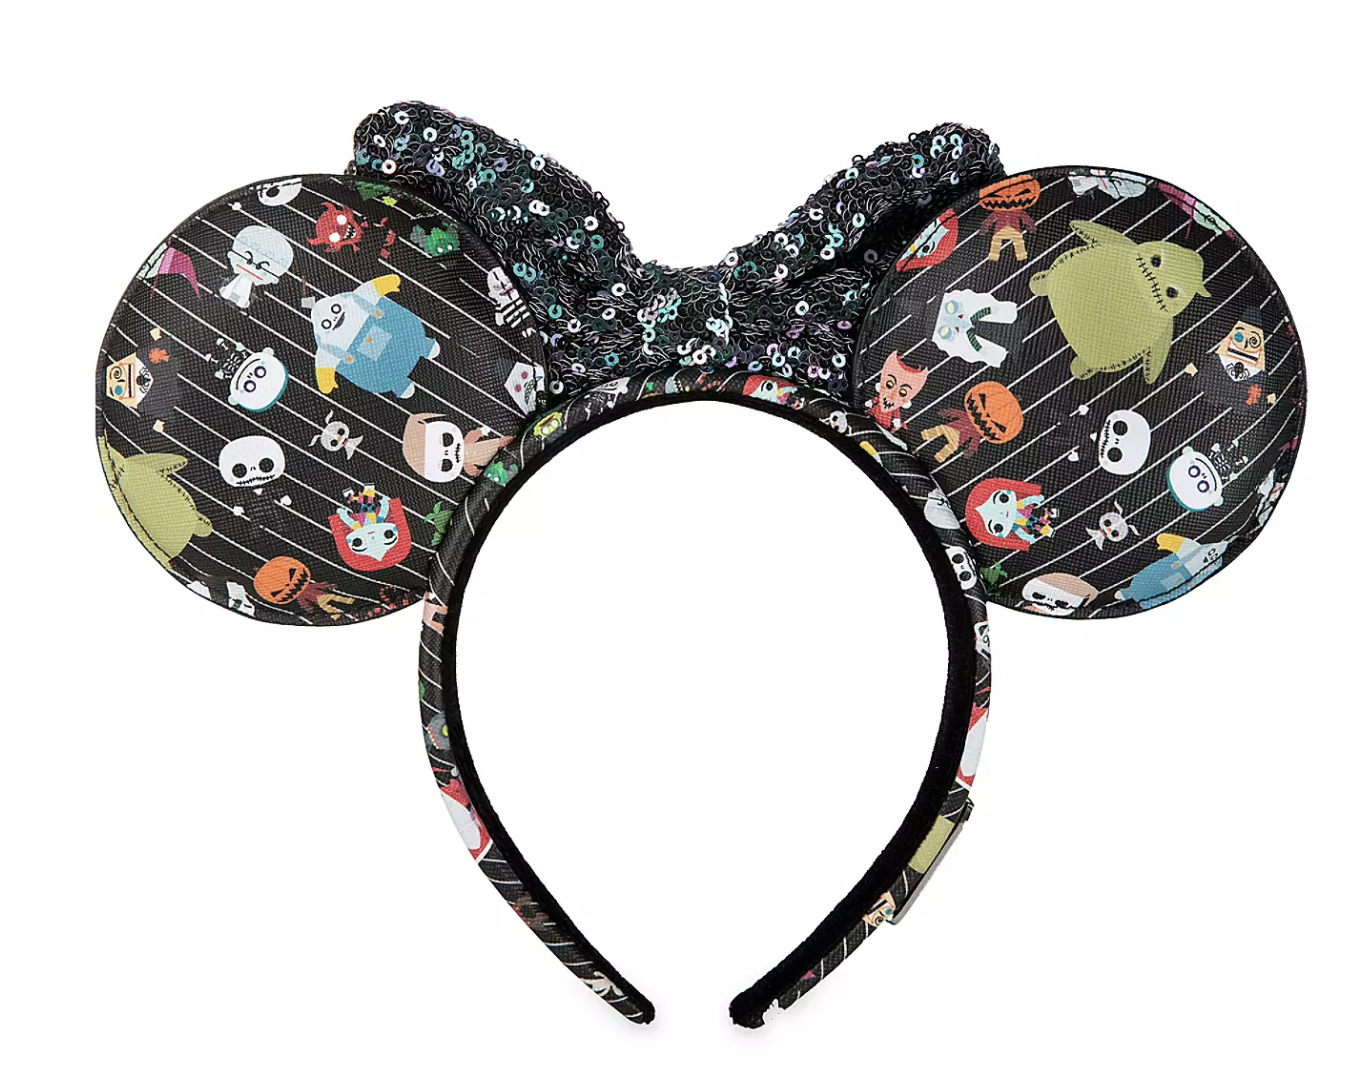 Minnie Jack Skellington Gifts for Her Sally Holiday Ears Mickey Sandy Claws\u2019 Christmas: Nightmare Before Christmas Ears Mouse Zero